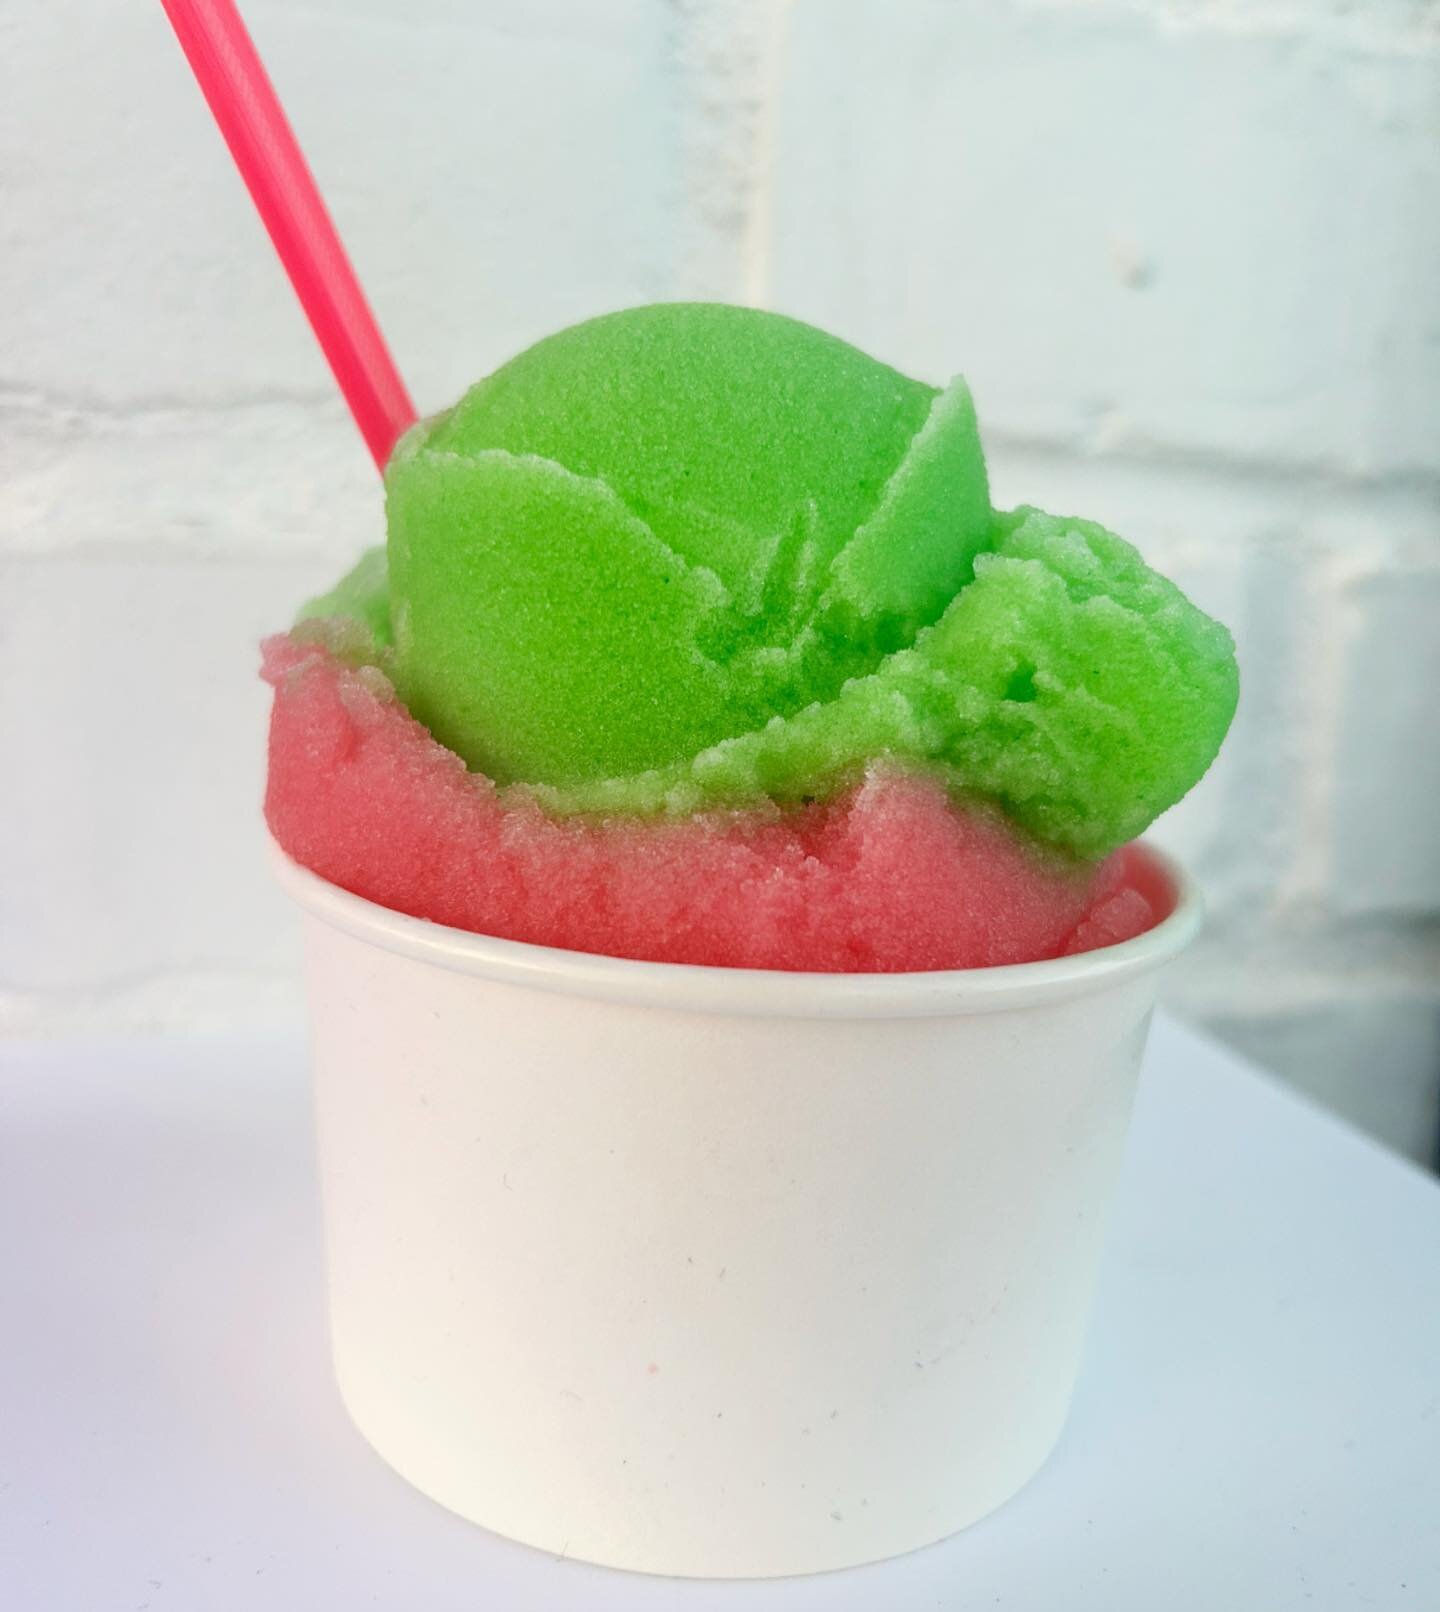 Sour apple + Bubble gum from the best (@lemonicekingofcorona) 
Feels like summer today with this beautiful weather &amp; tasty ice combo!